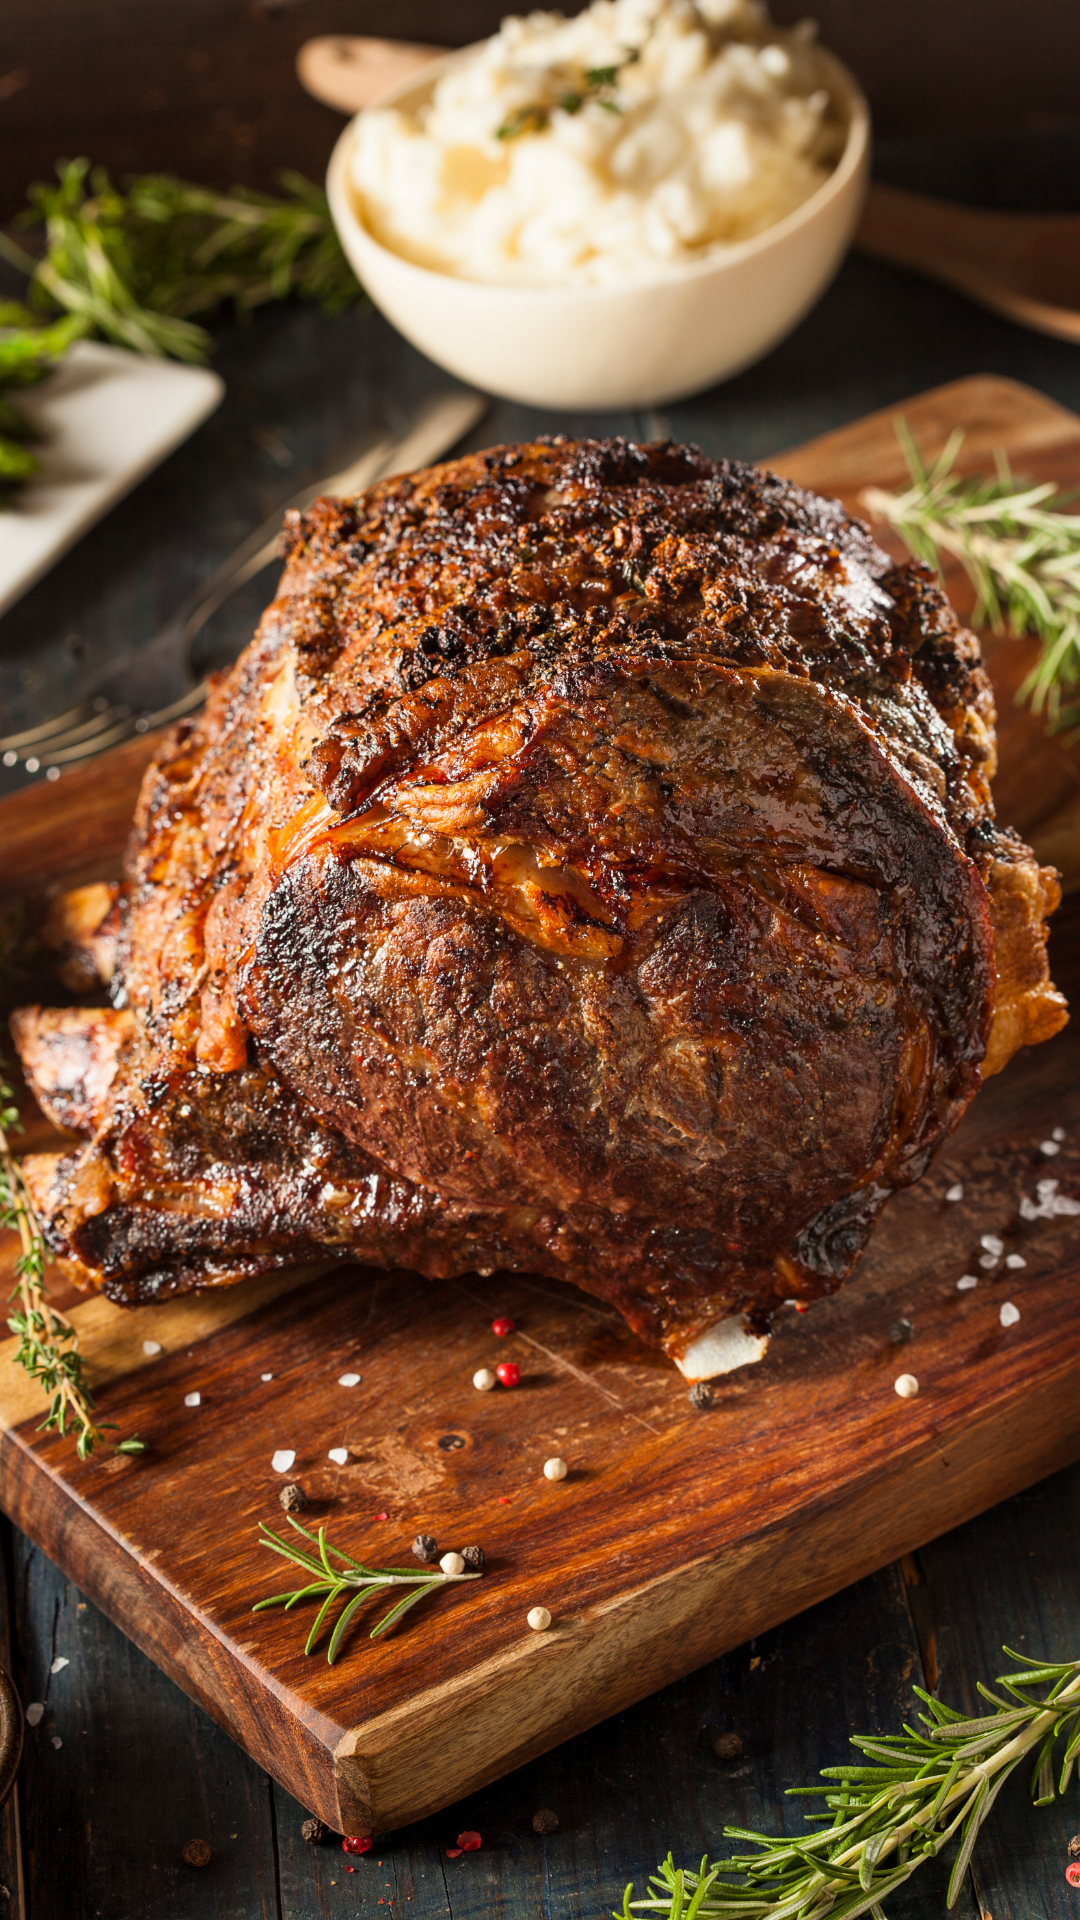 Guide to Purchasing and Cooking Prime Rib